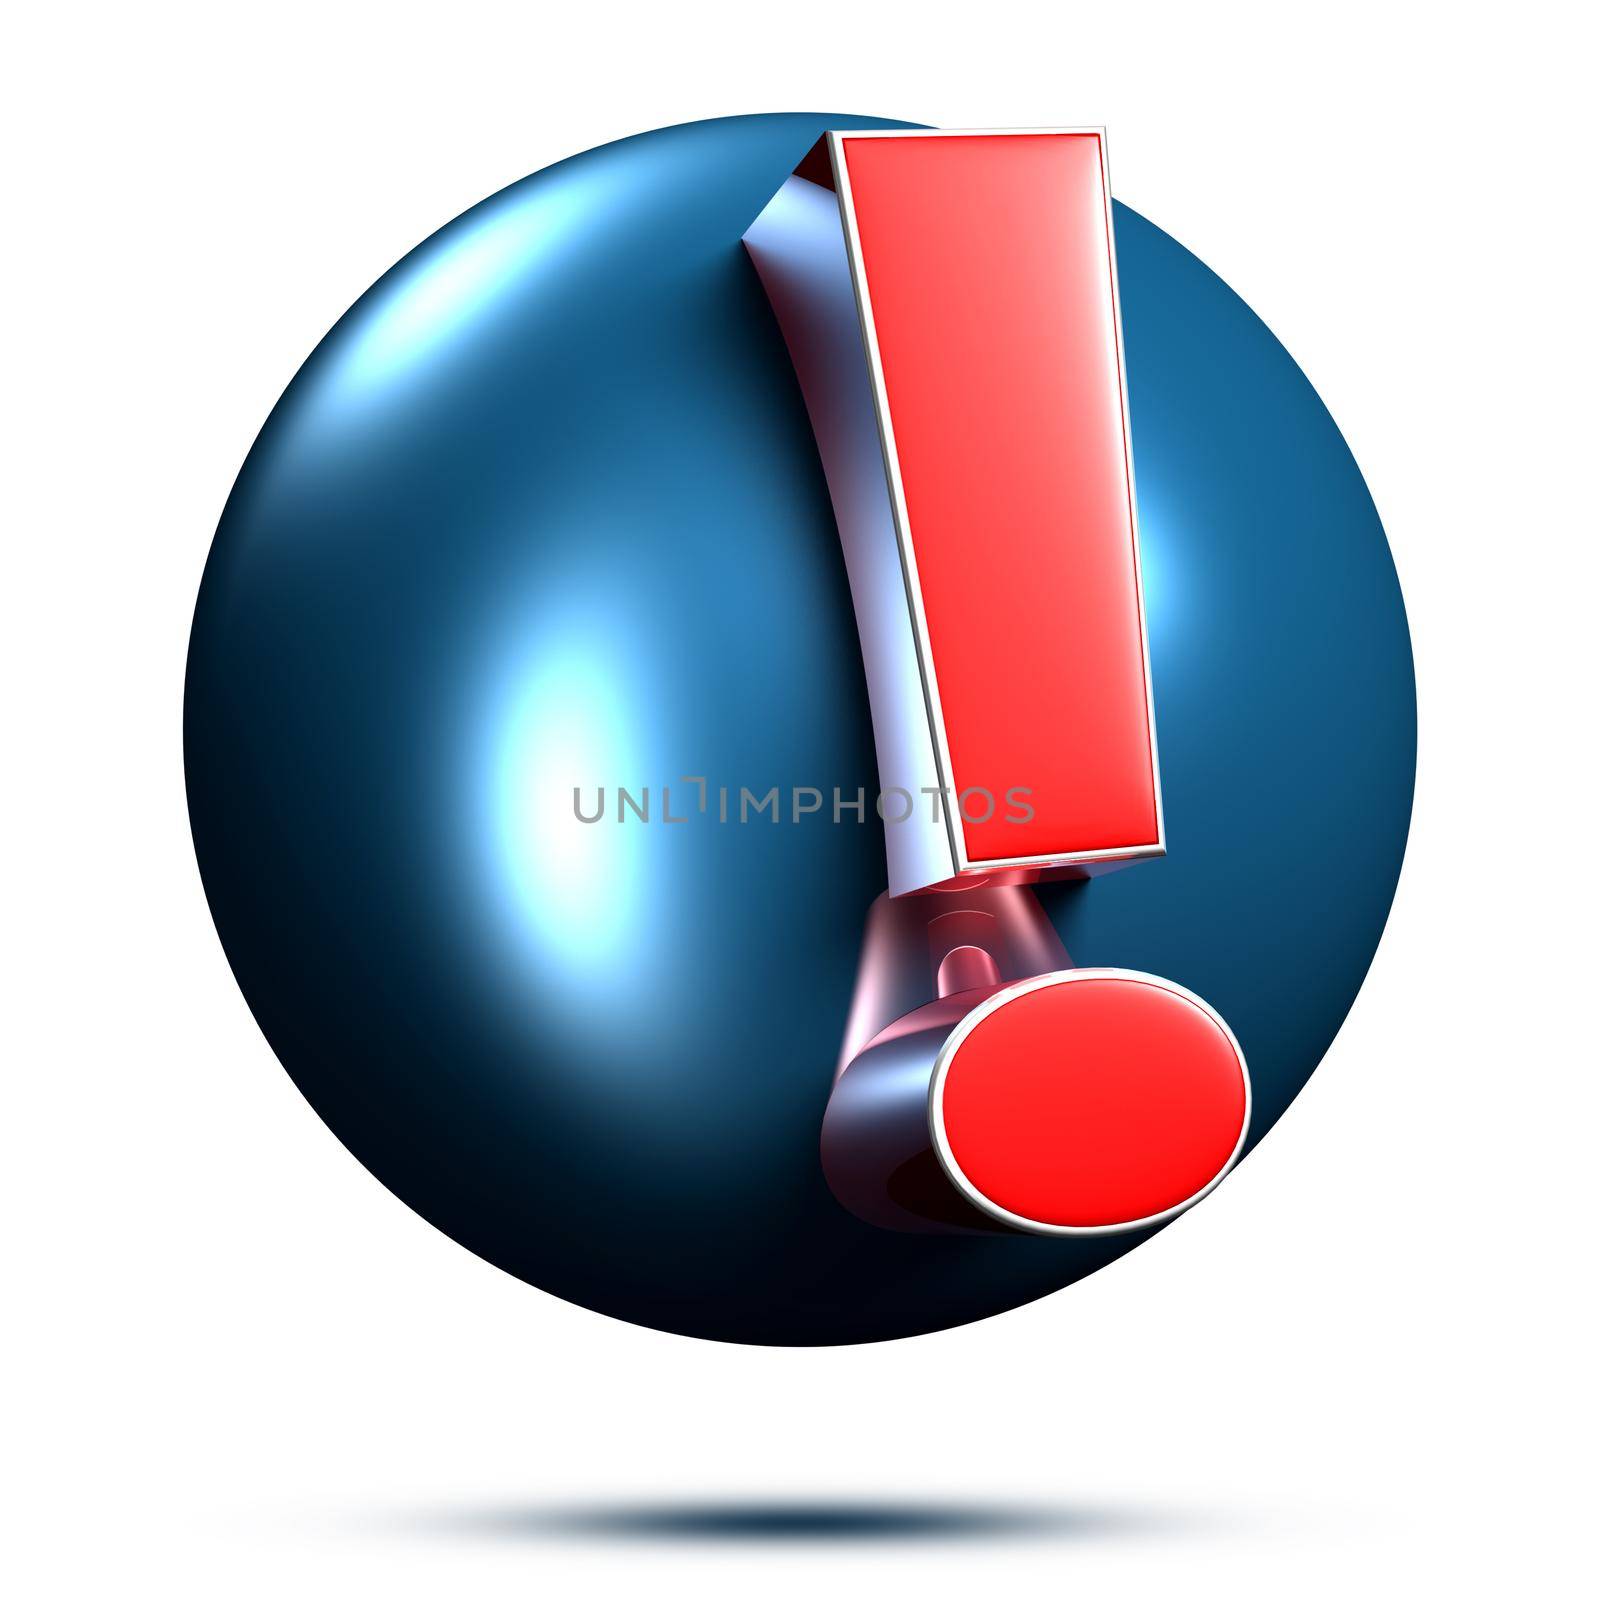 Exclamation mark isolated on white background illustration 3D rendering with clipping path.